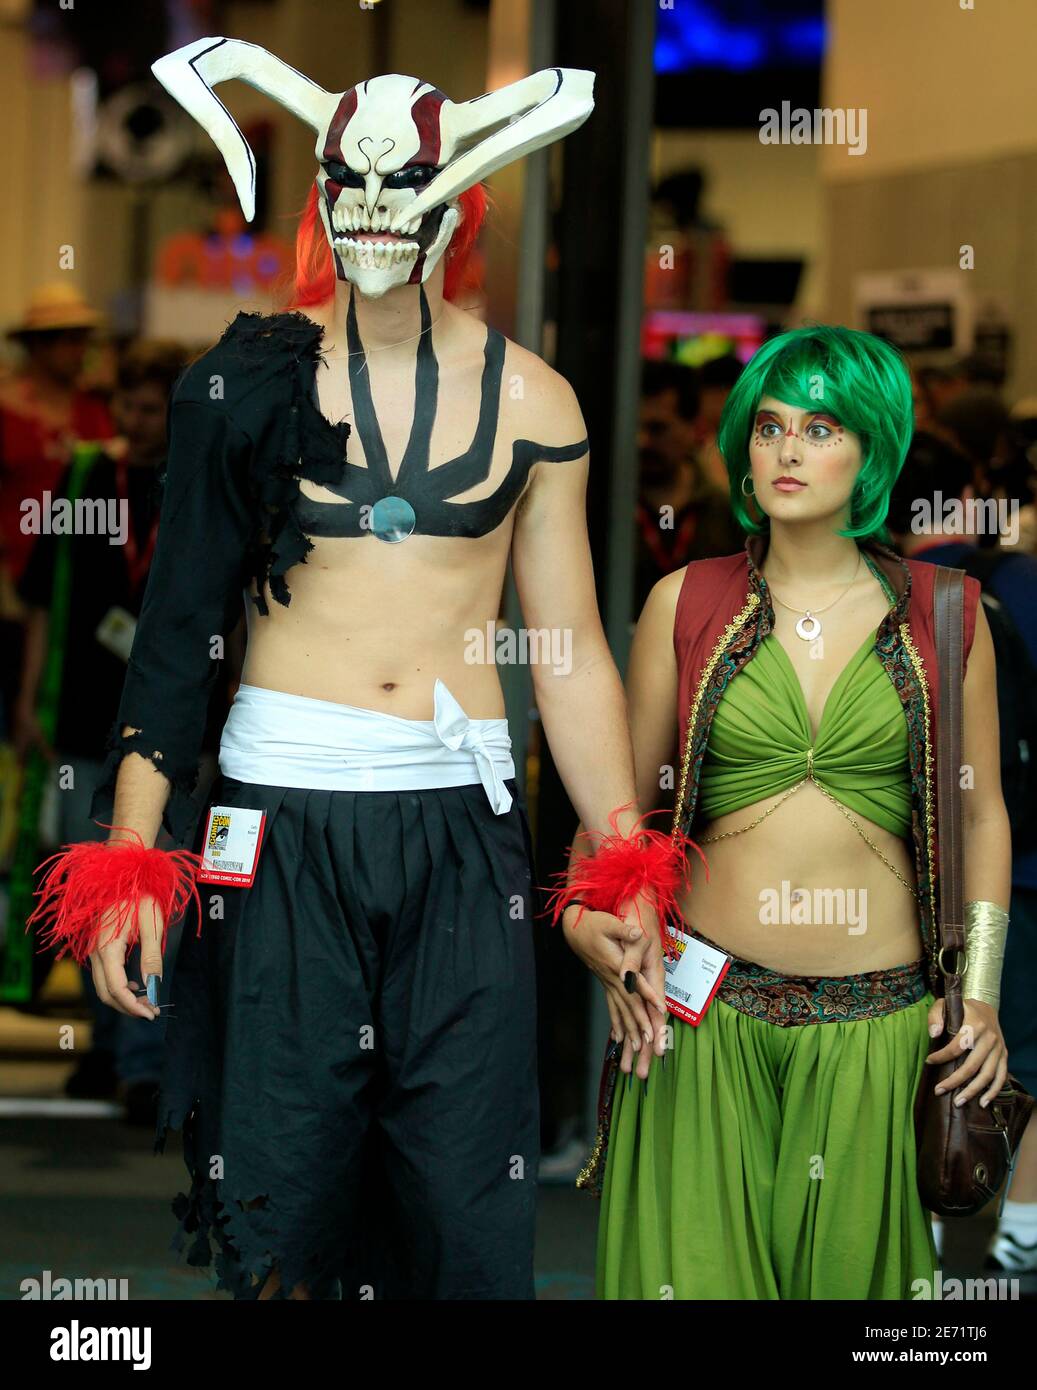 Attendees arrive in costume for the third day of the pop culture convention Comic Con in San Diego, California July 24, 2010.    REUTERS/Mike Blake  (UNITED STATES - Tags: ENTERTAINMENT) Stock Photo